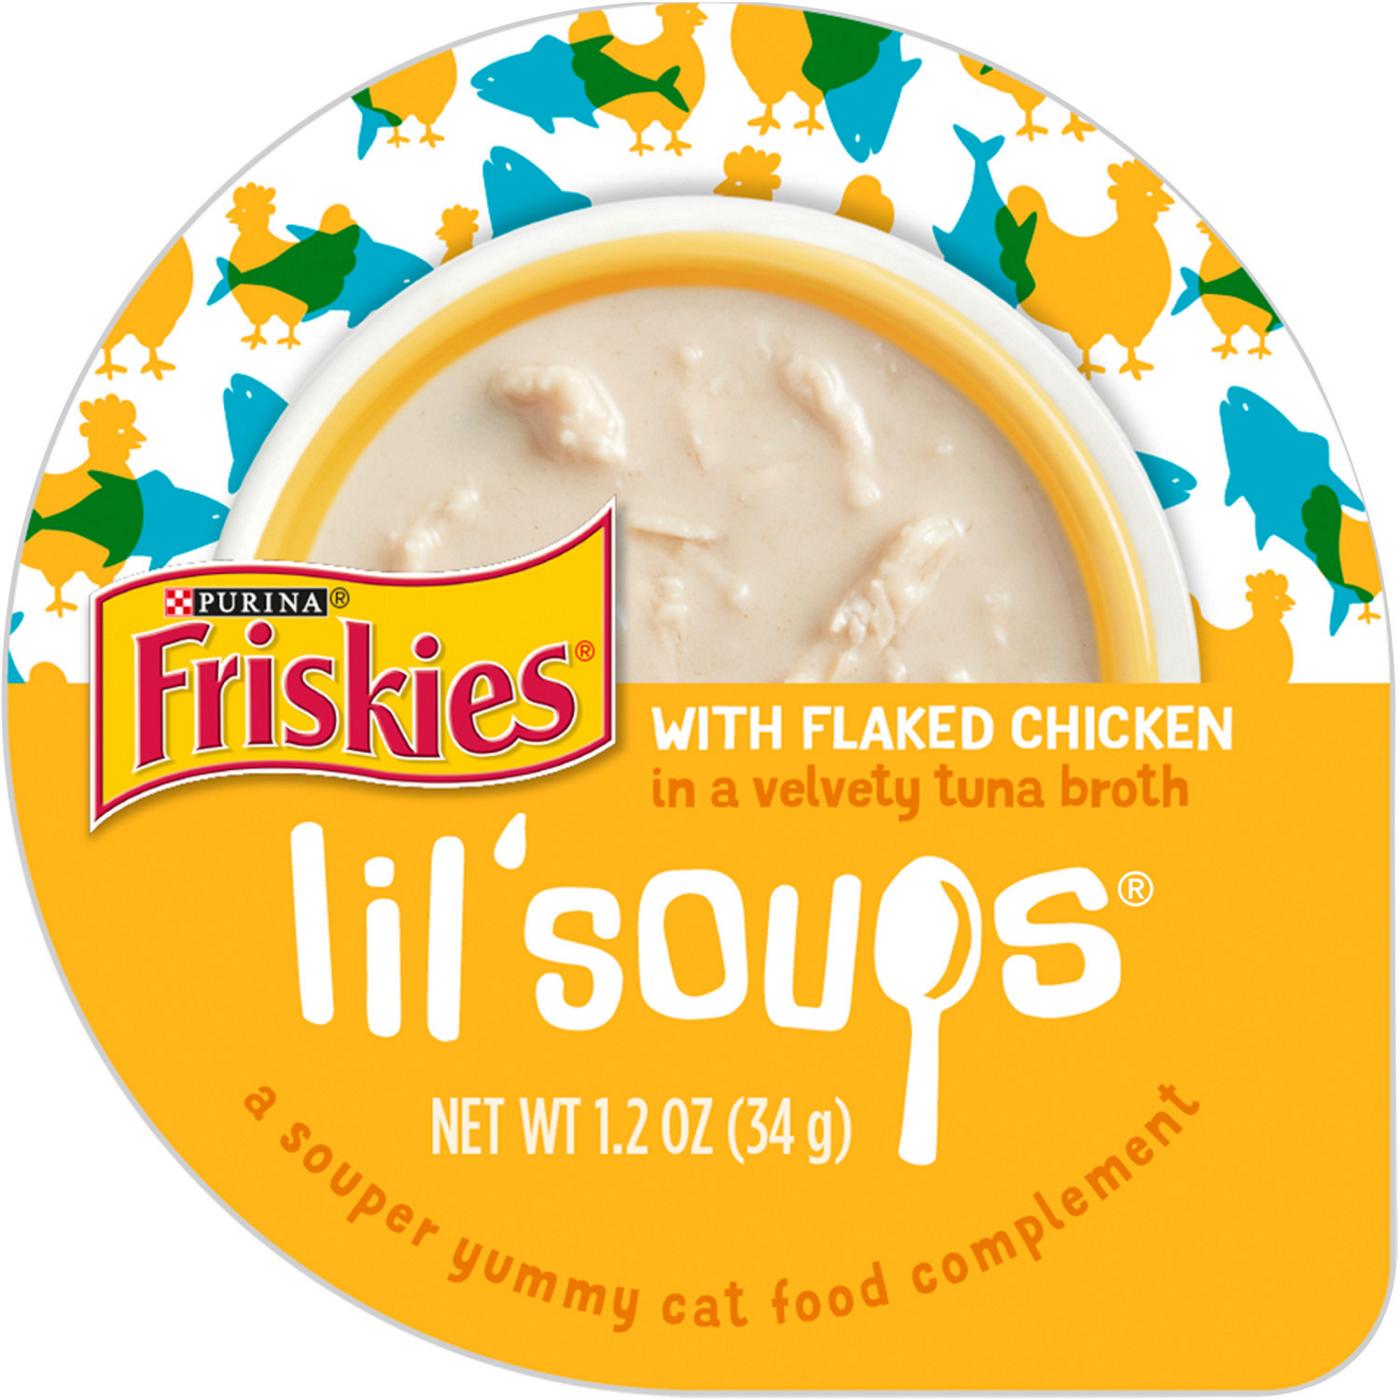 Friskies Purina Friskies Natural, Grain Free Wet Cat Food Lickable Cat Treats, Lil' Soups Flaked Chicken; image 1 of 5